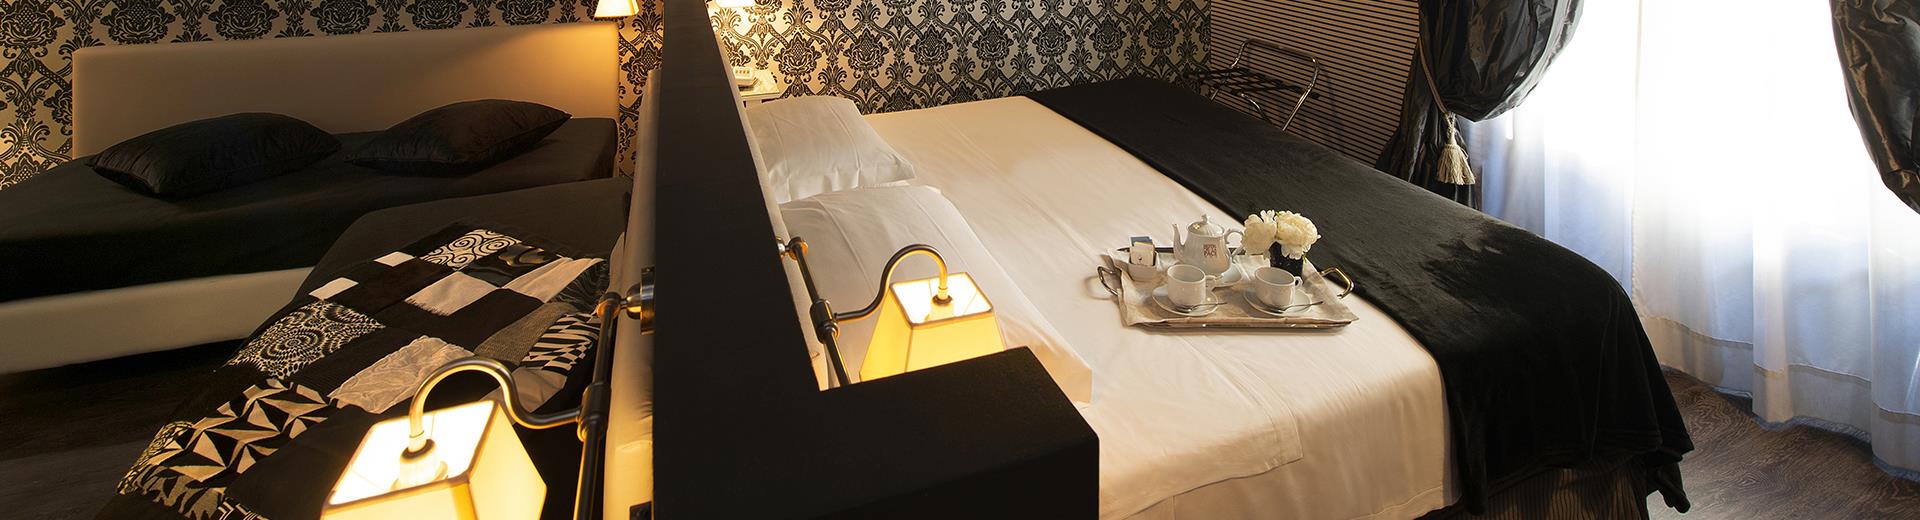 For a stay in Florence in comfort, choose Sure Hotel Collection De La Pace: free Wi-Fi, rich breakfast buffet included in the price and free parking are just a few of the amenities at your disposal. What are you waiting for?